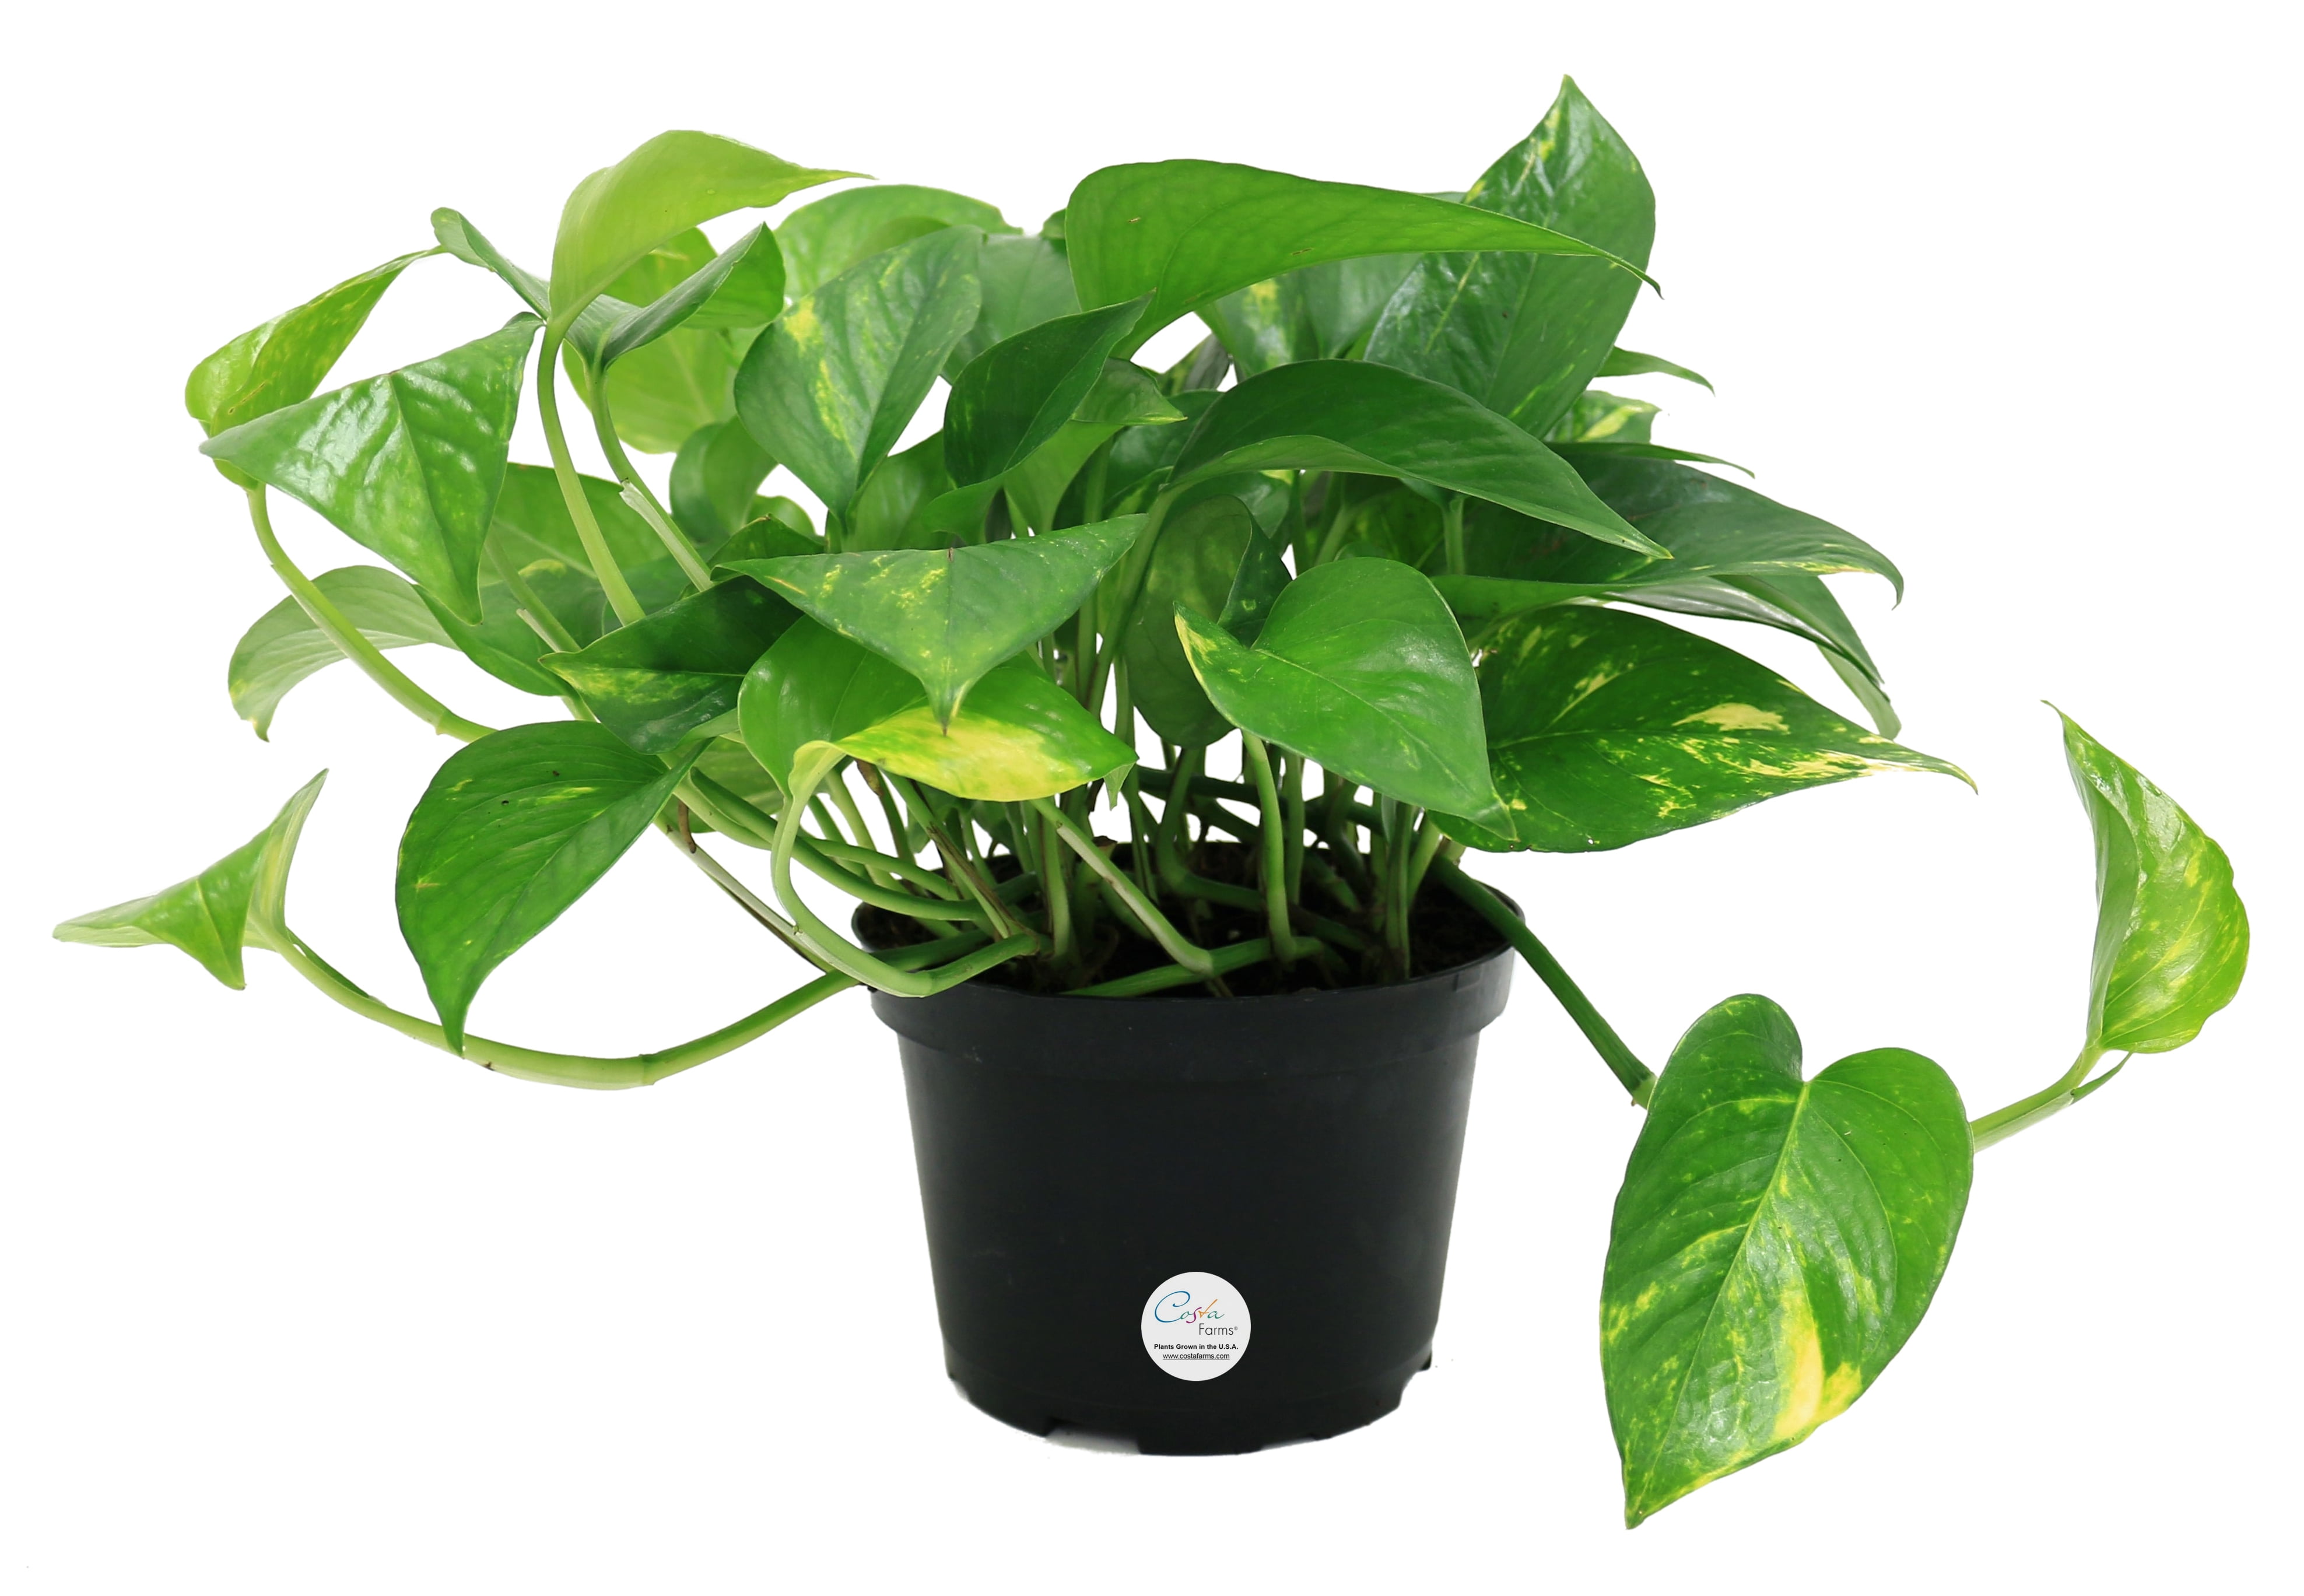 Live Combo 4 Hanging Plant Fit 4/" Pot Easy to Grow Best Houseplant Best Gift